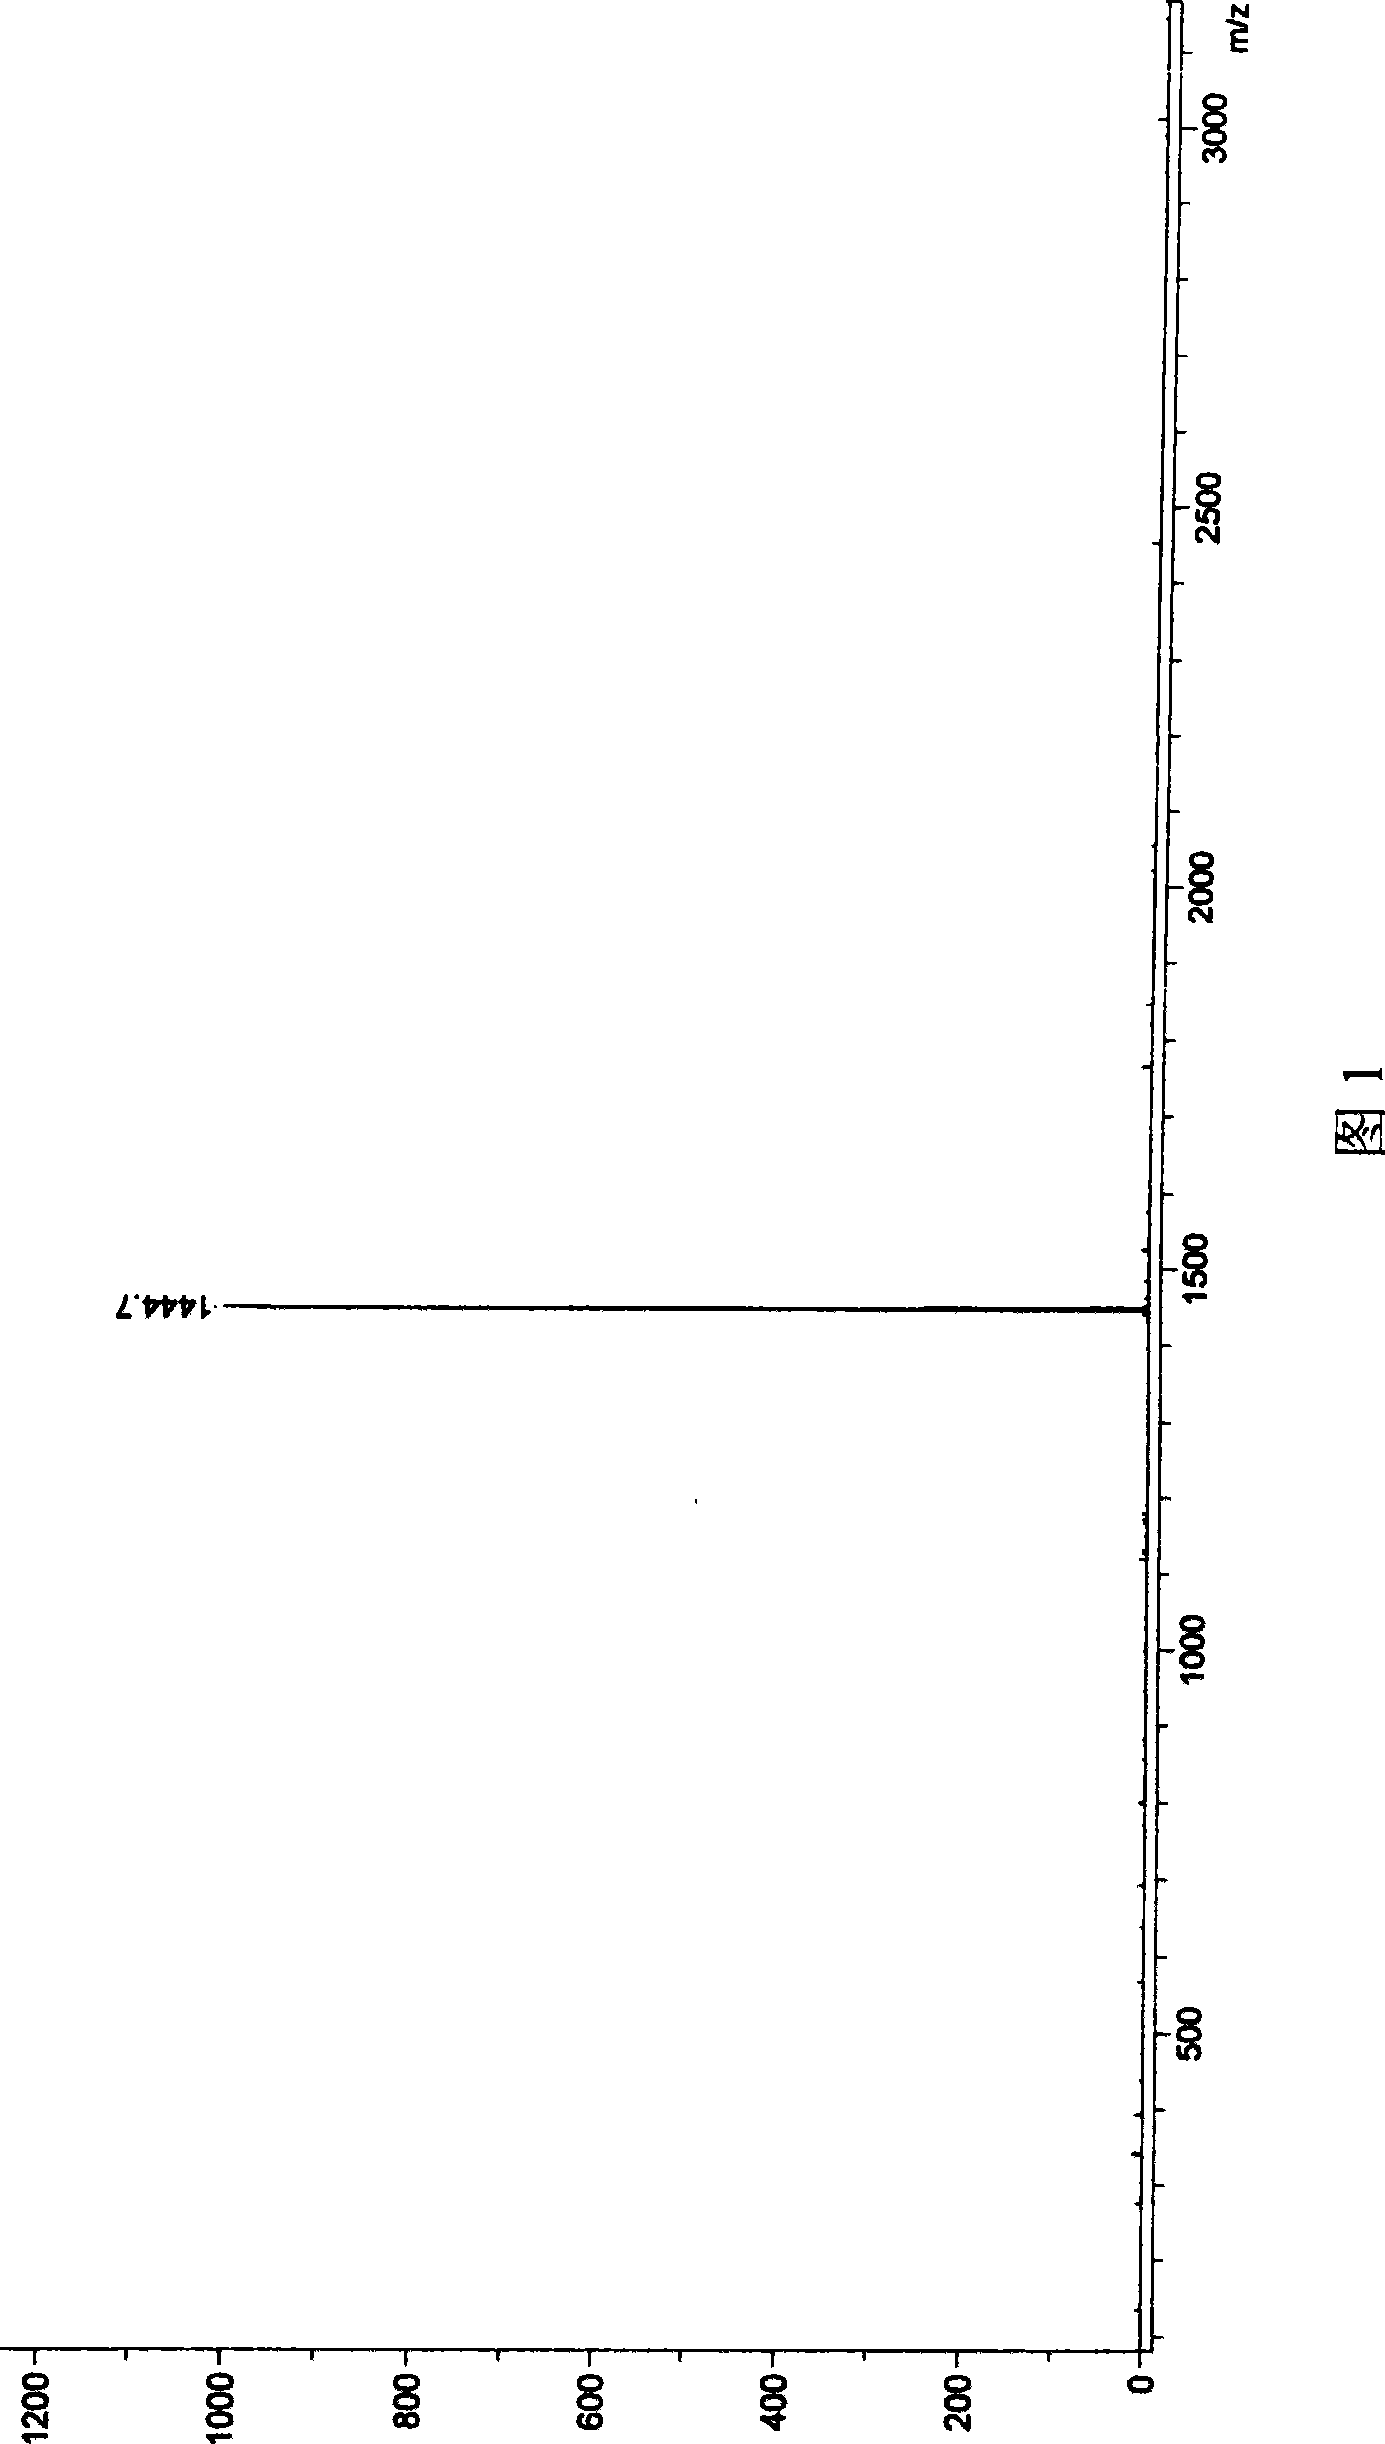 Diperylene-3,4,6,7:12,13,15,16-octocarboxylic tetraimides compounds and production method thereof